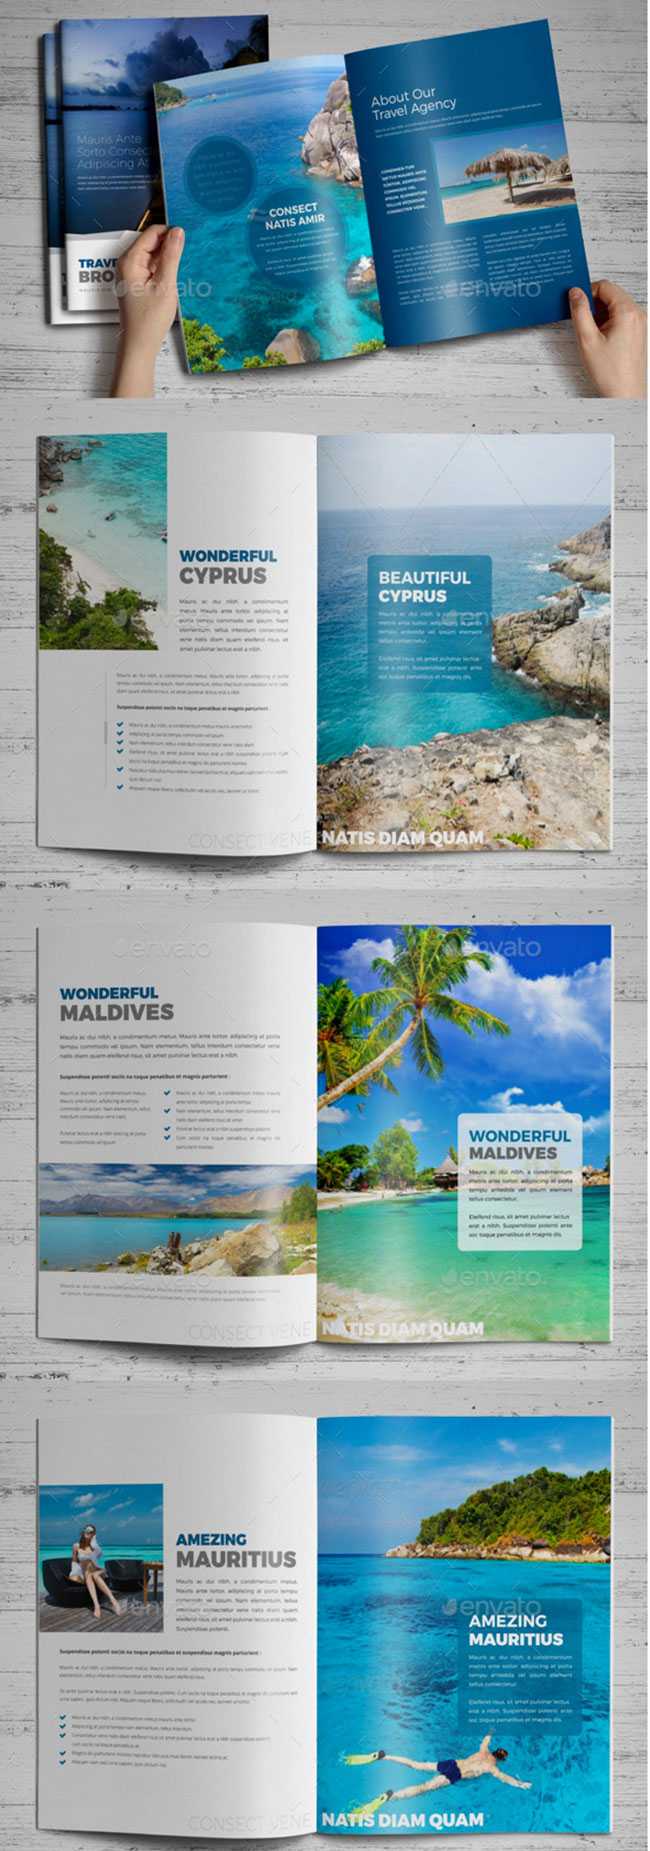 40+ Best Travel And Tourist Brochure Design Templates 2019 Regarding Travel And Tourism Brochure Templates Free